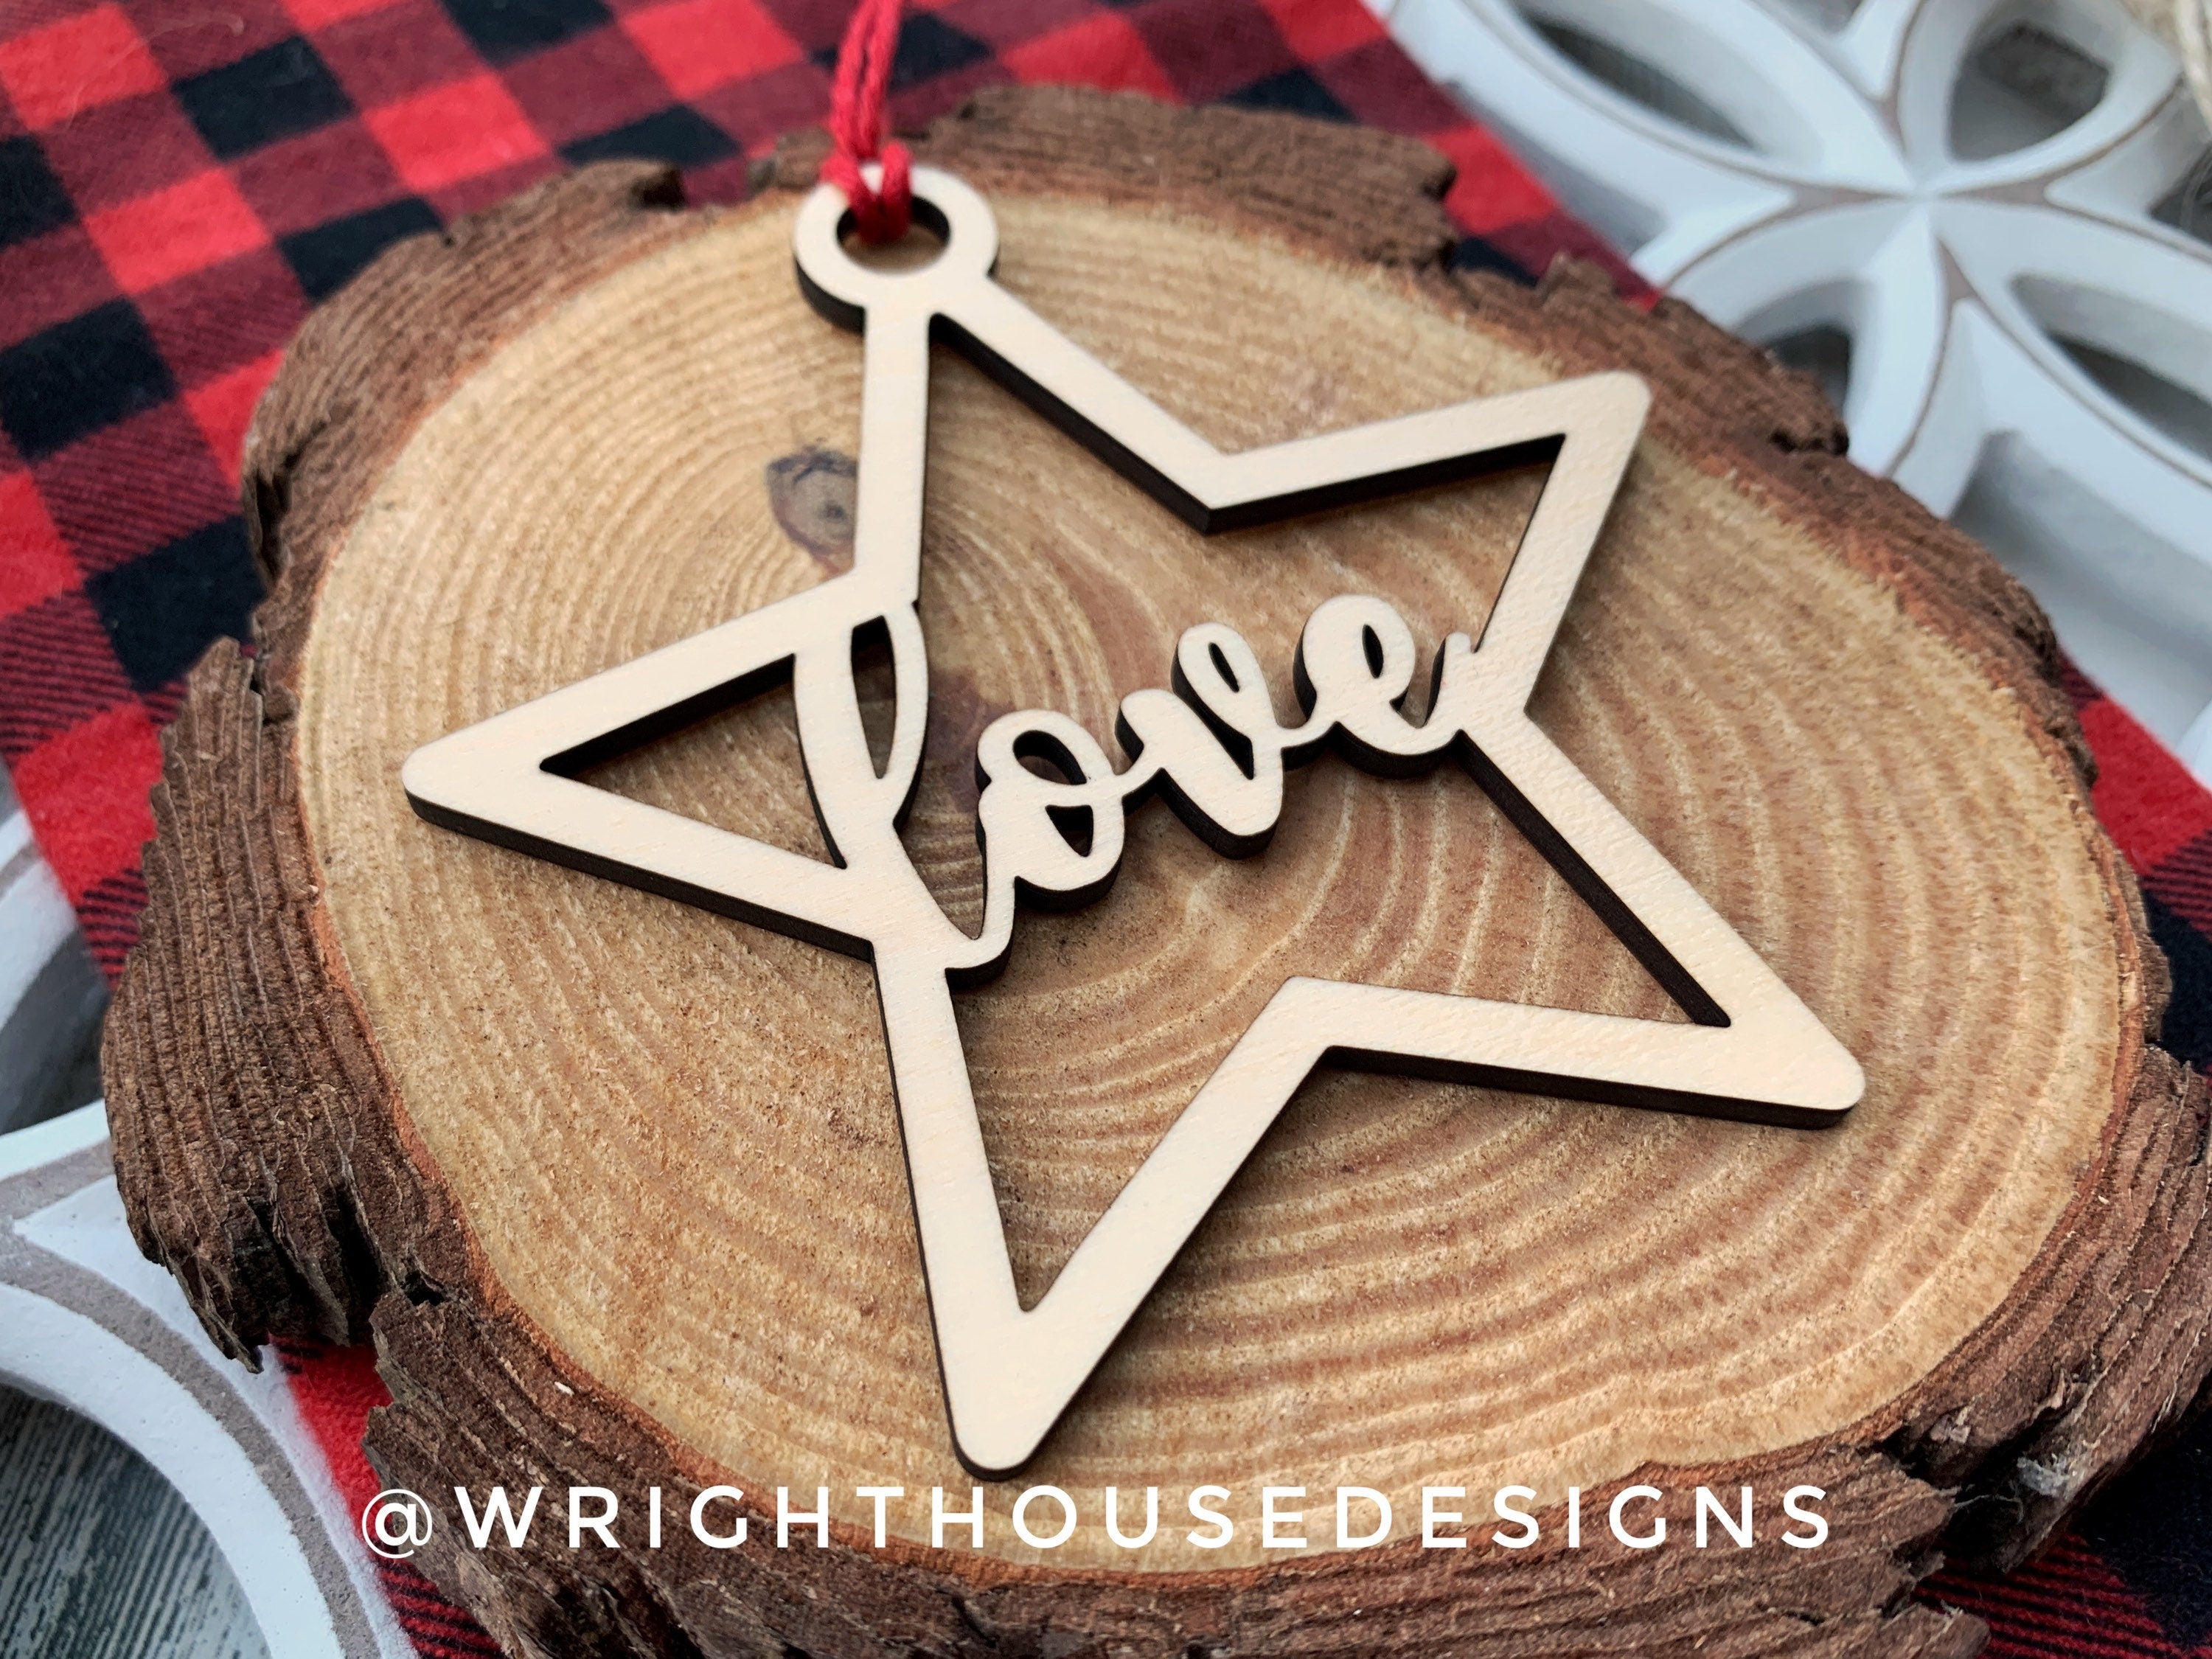 Love Wooden Star - Christmas Tree Ornament - Laser Cut - Stocking Stuffer - Present Tag - Gift Wrapping Accessory